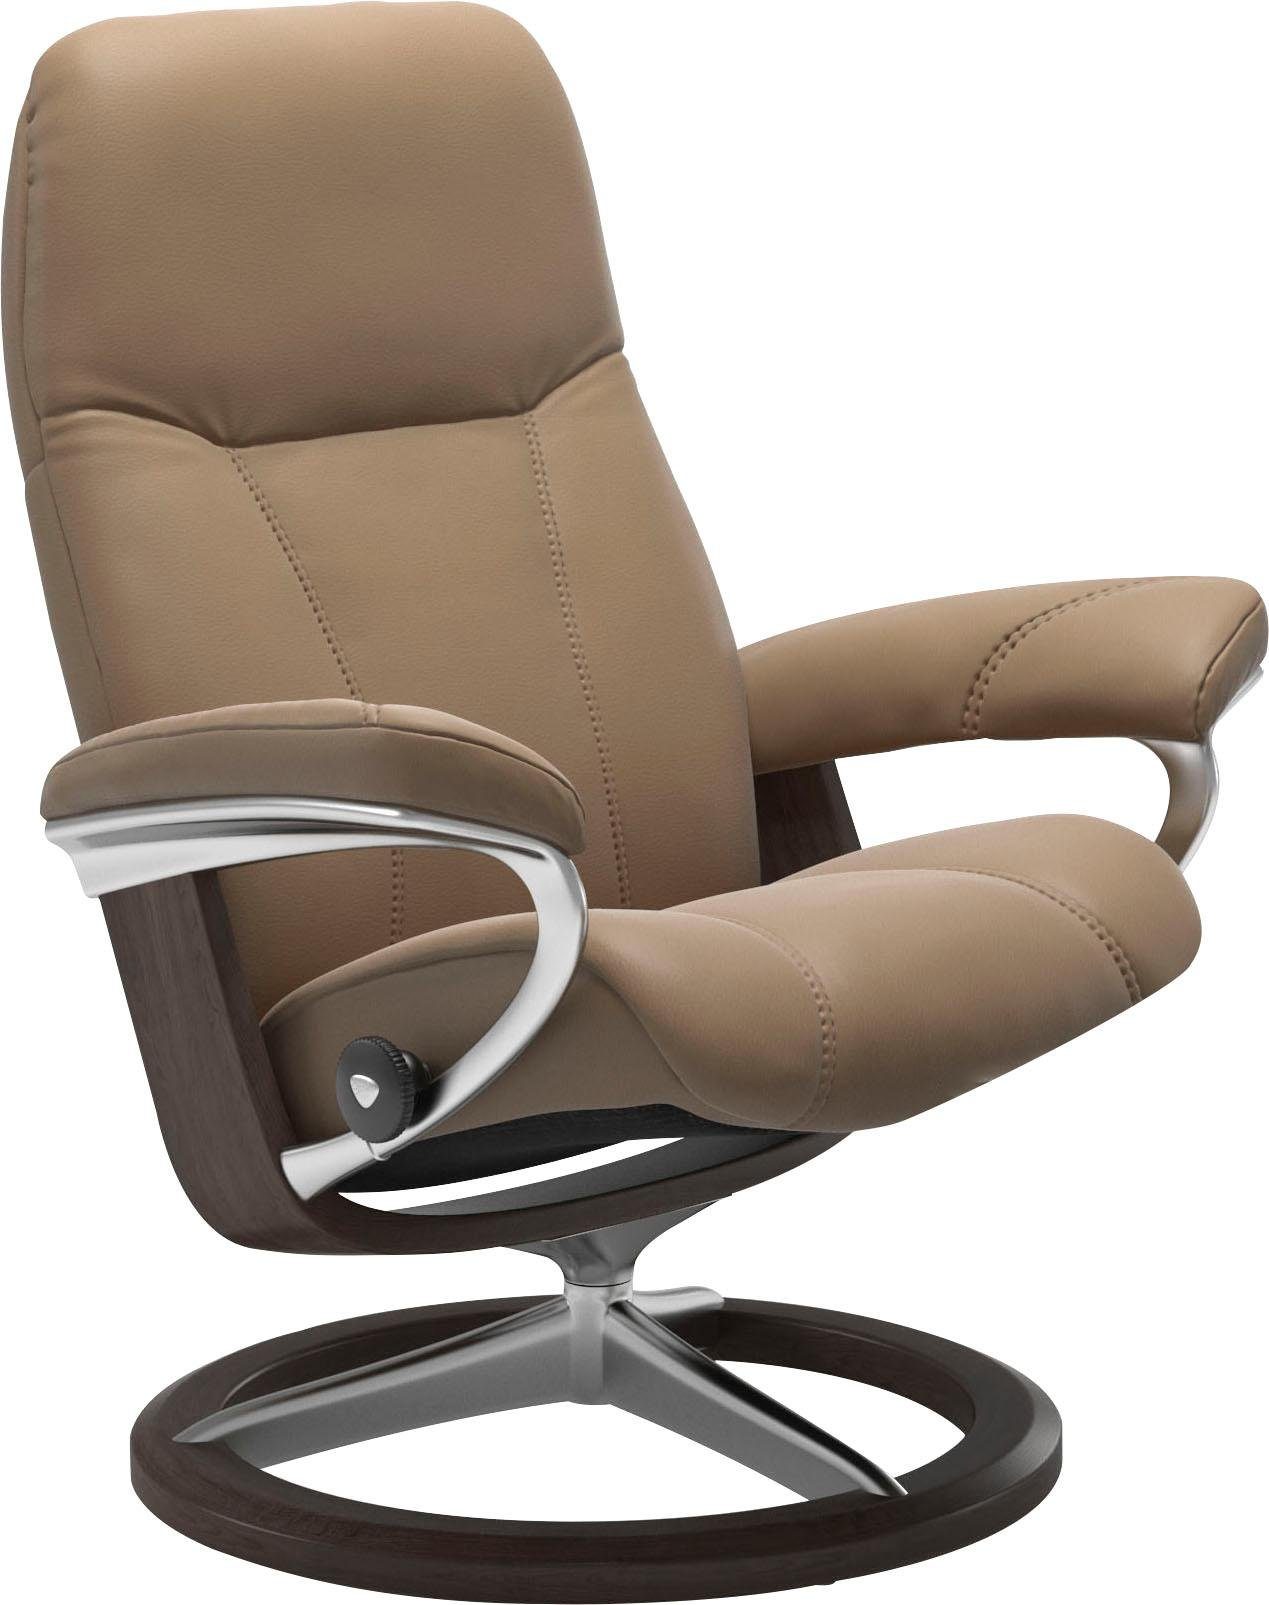 Stressless® Relaxsessel Consul, mit Signature Größe L, Base, Gestell Wenge